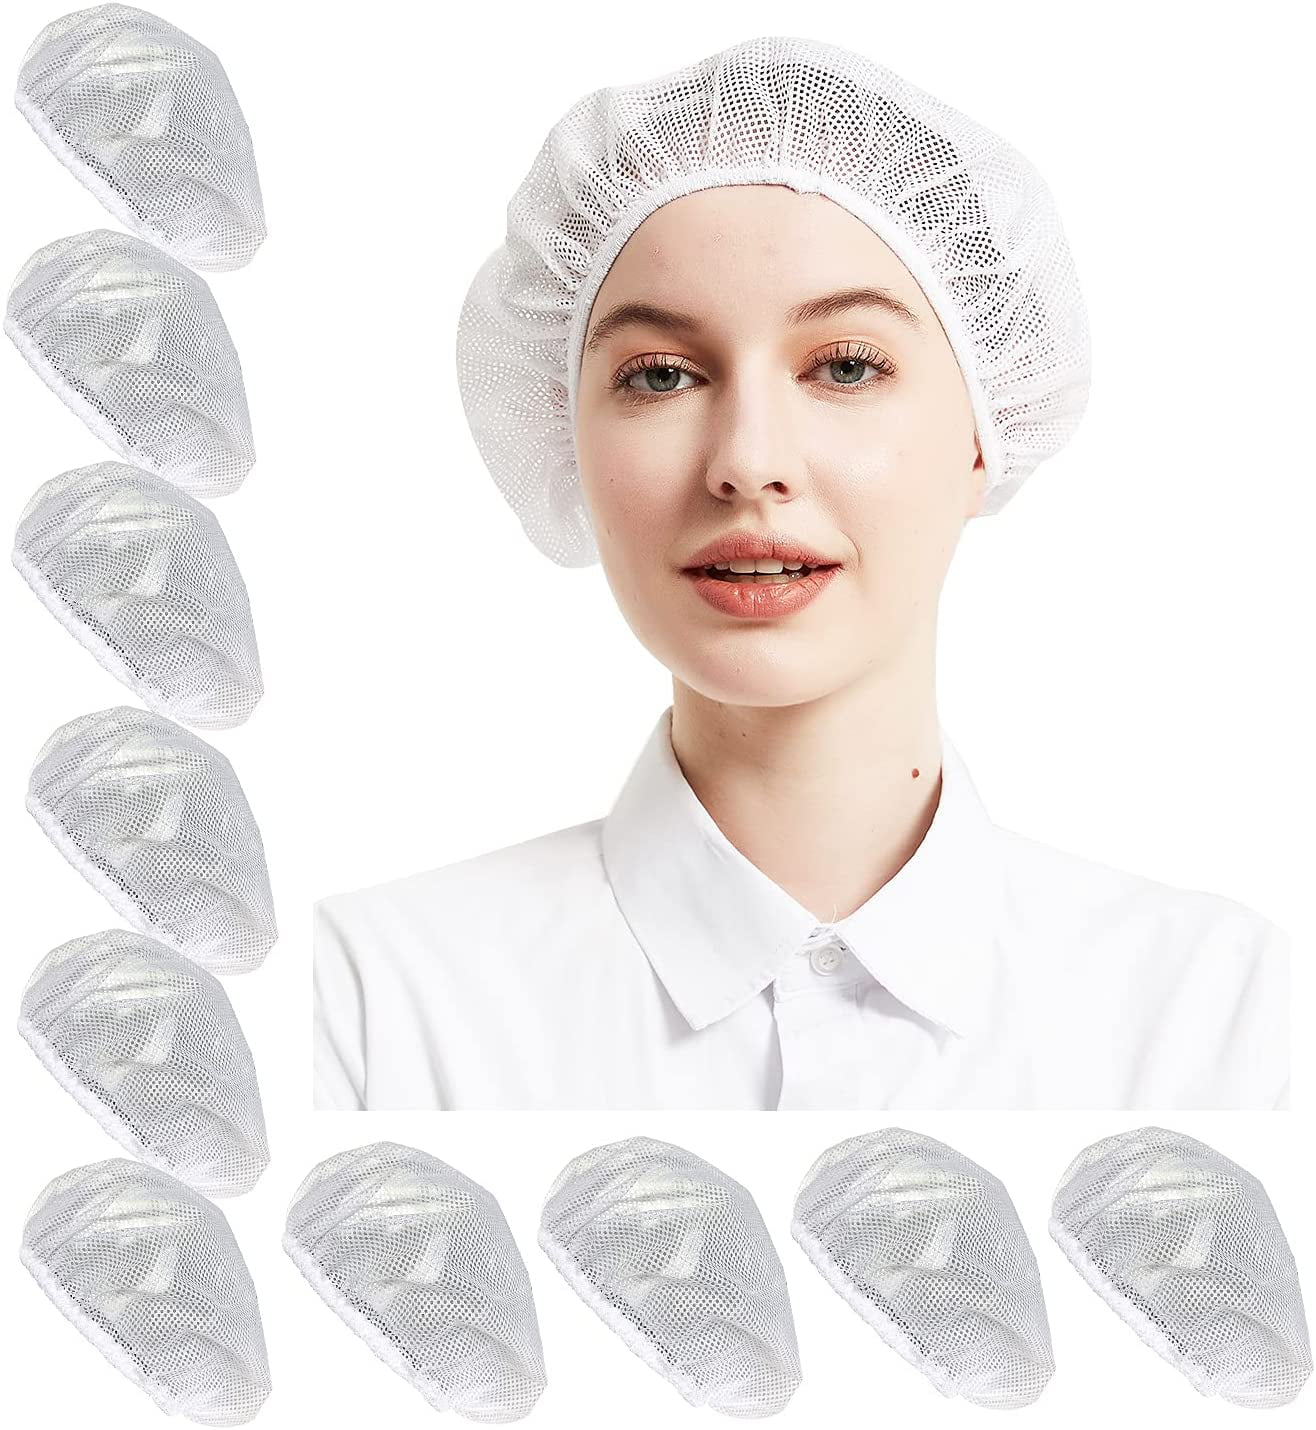 5 X WHITE CHEF RESTAURANT FOOD PREP PREPARATION HAT WITH FITTED HAIR MESH NET 